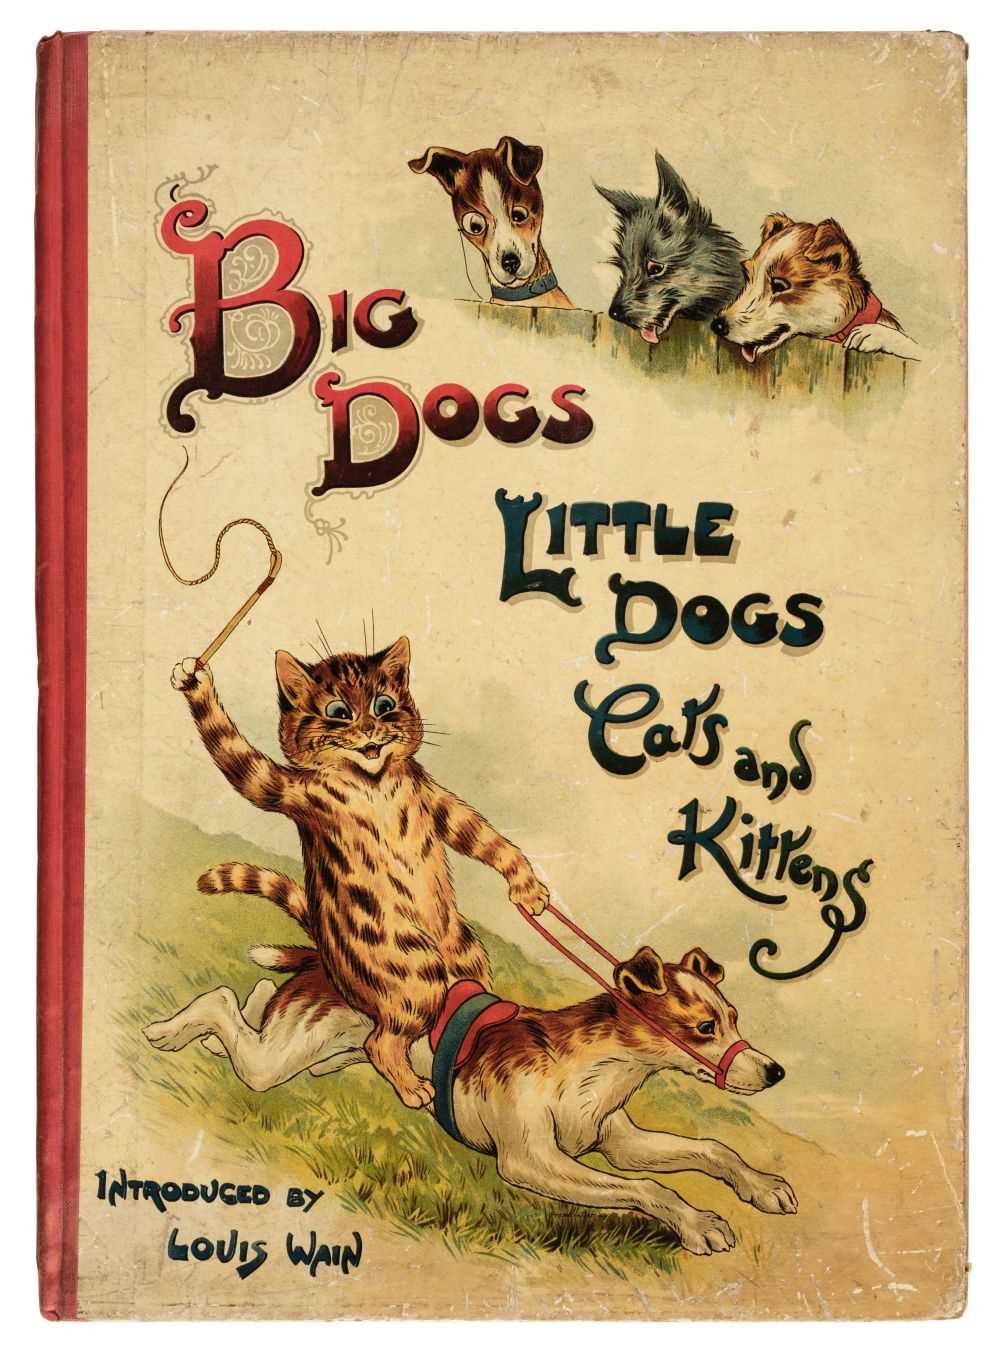 Lot 721 - Wain (Louis). Big Dogs Little Dogs Cats and Kittens, [1903]